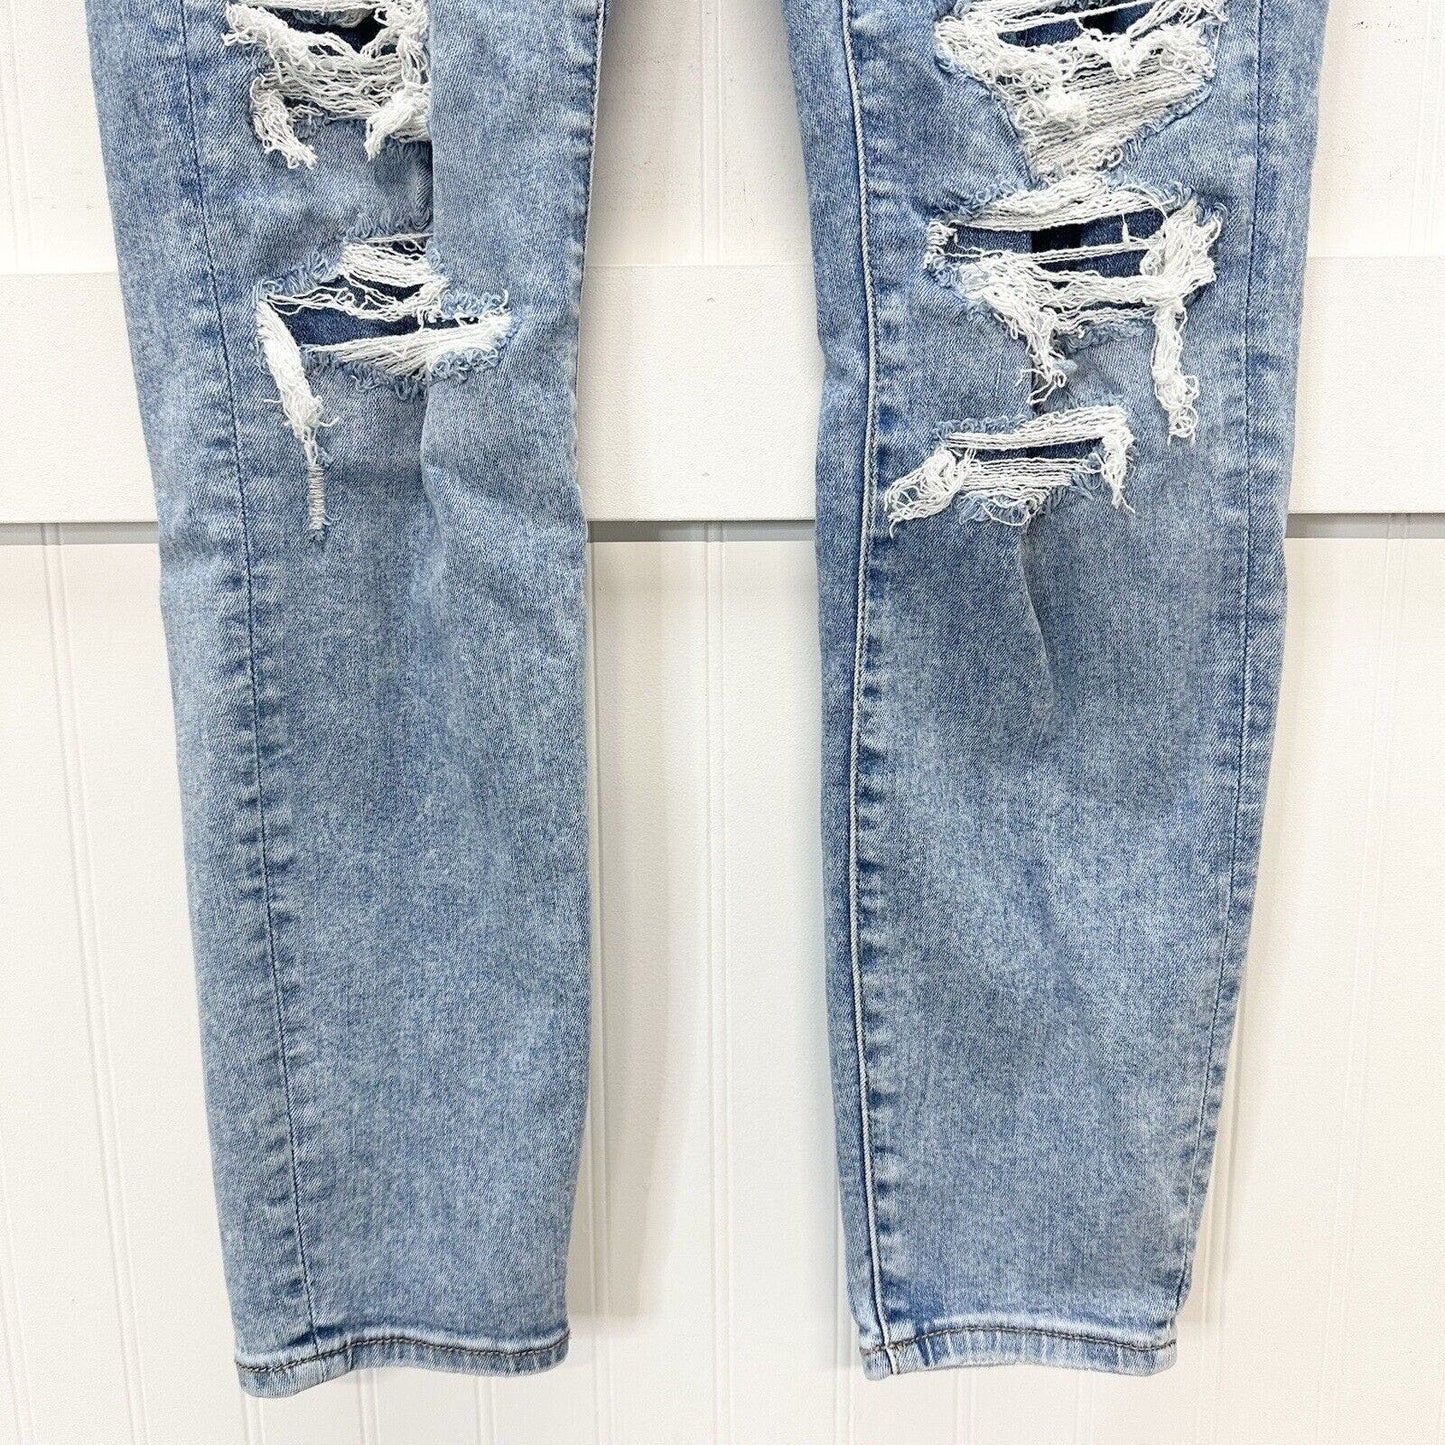 American Eagle Jeans 14 Jegging Next Level Stretch Blue Denim Repaired Distress